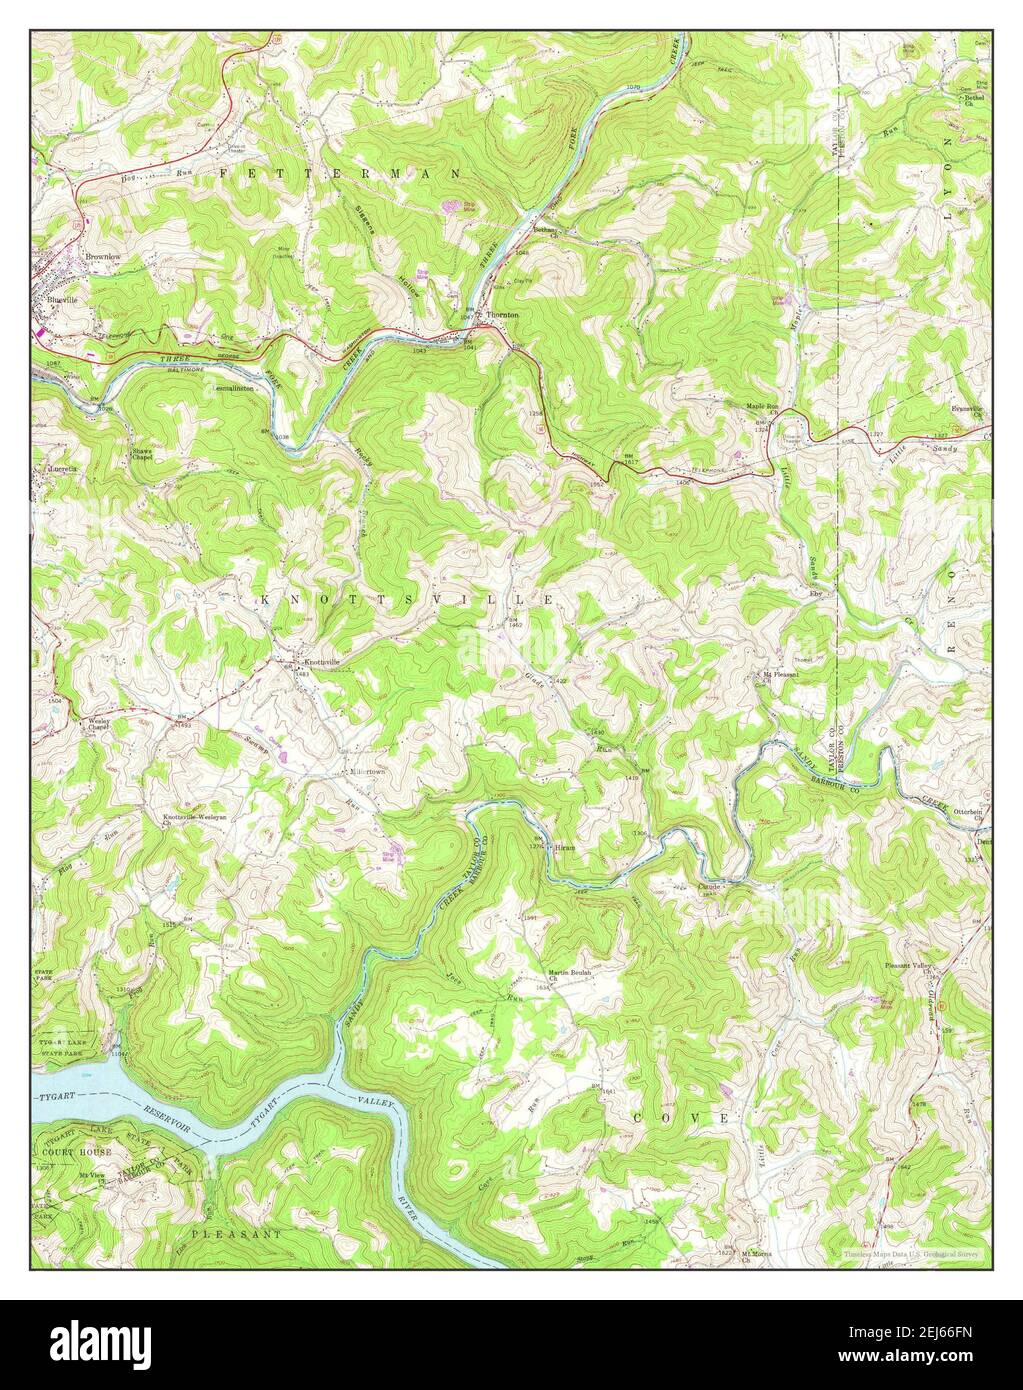 Thornton, West Virginia, map 1958, 1:24000, United States of America by Timeless Maps, data U.S. Geological Survey Stock Photo